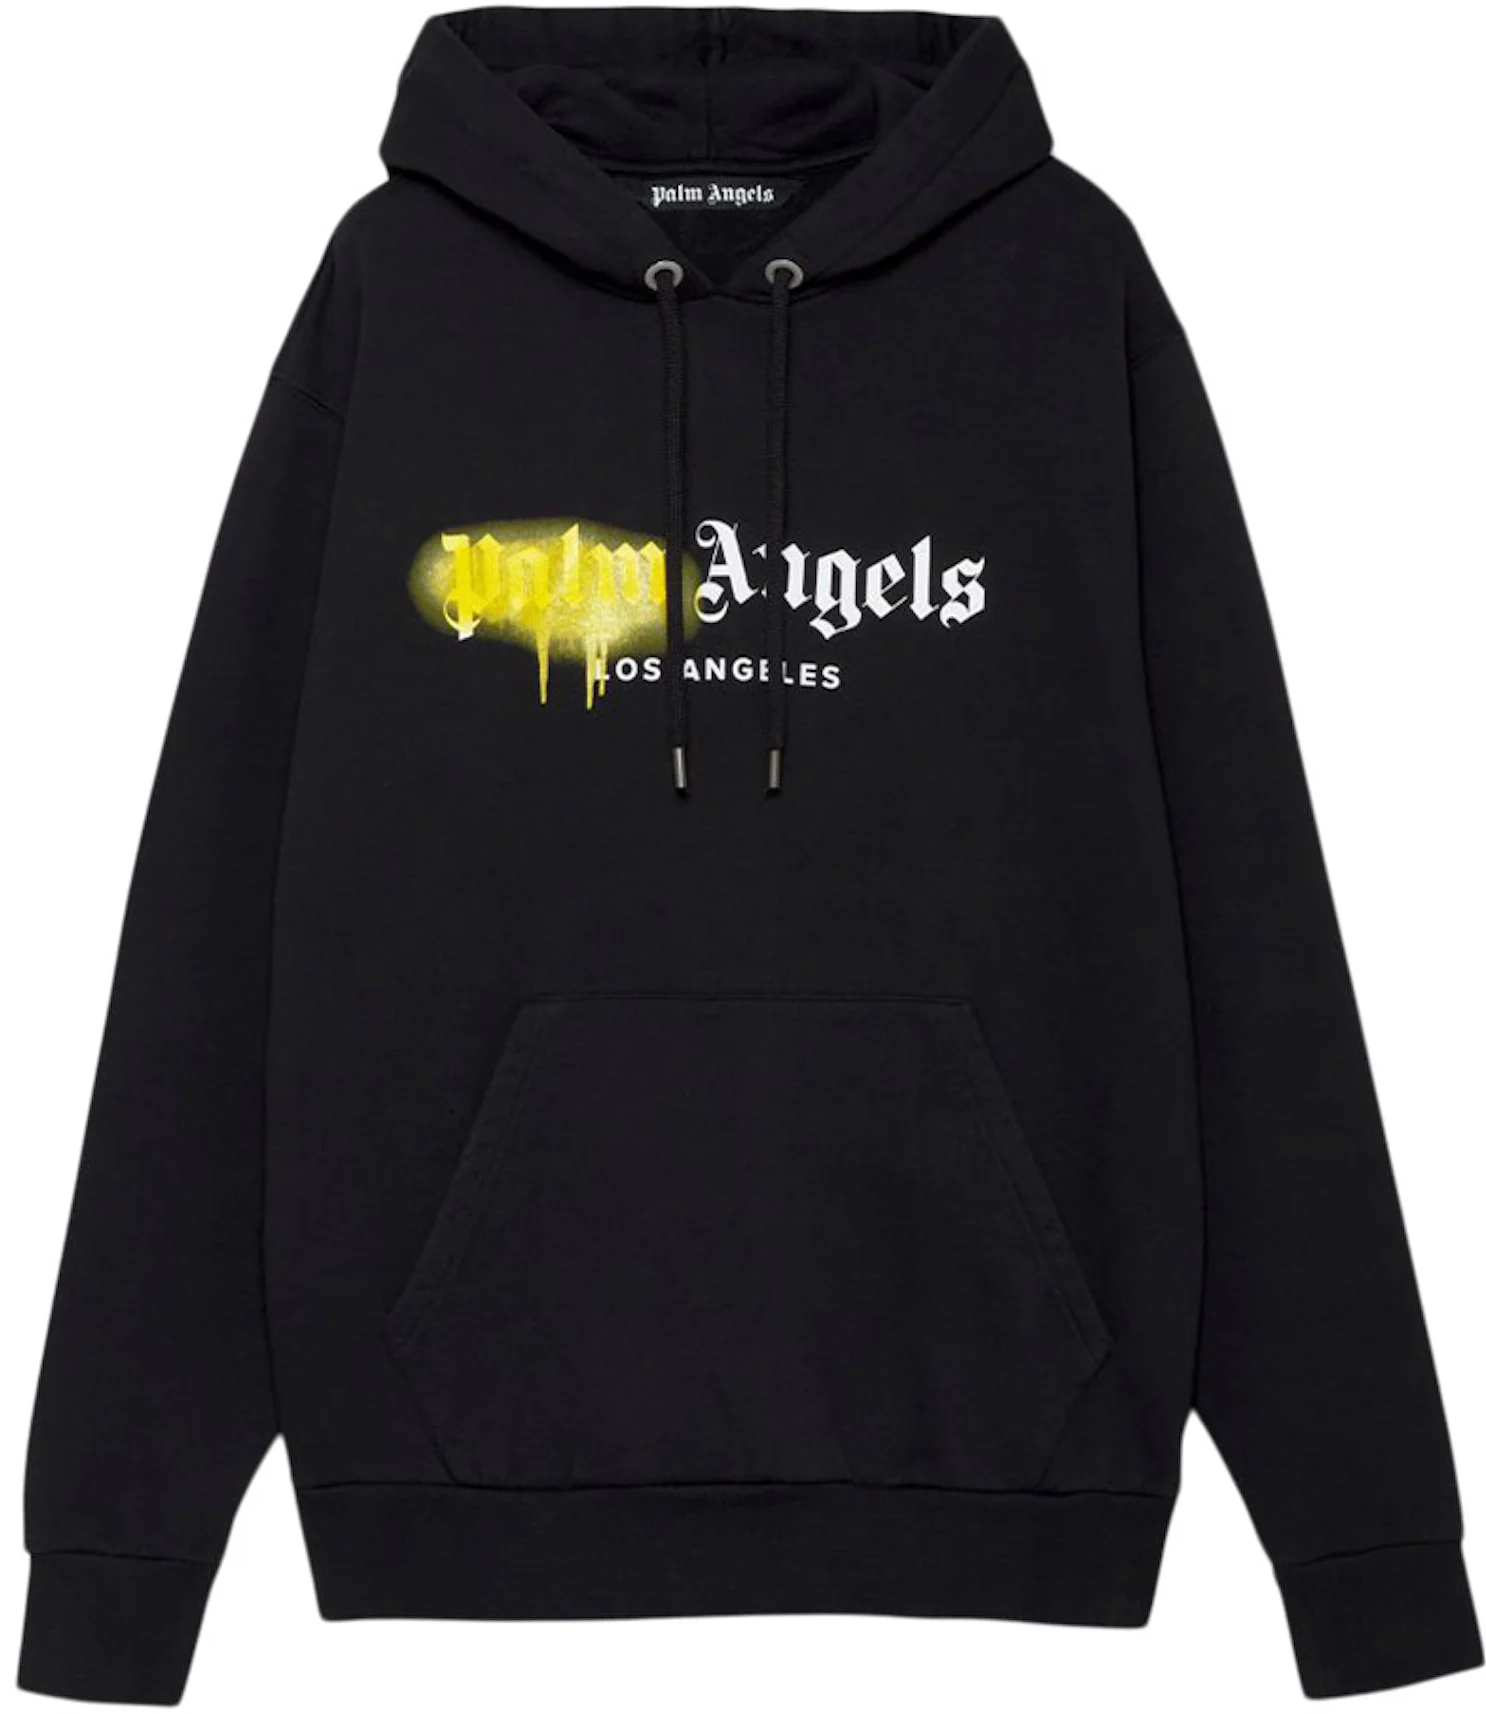 https://images.stockx.com/images/Palm-Angels-Los-Angeles-Sprayed-Hoodie-Black-Yellow.jpg?fit=fill&bg=FFFFFF&w=1200&h=857&fm=webp&auto=compress&dpr=2&trim=color&updated_at=1666823041&q=60